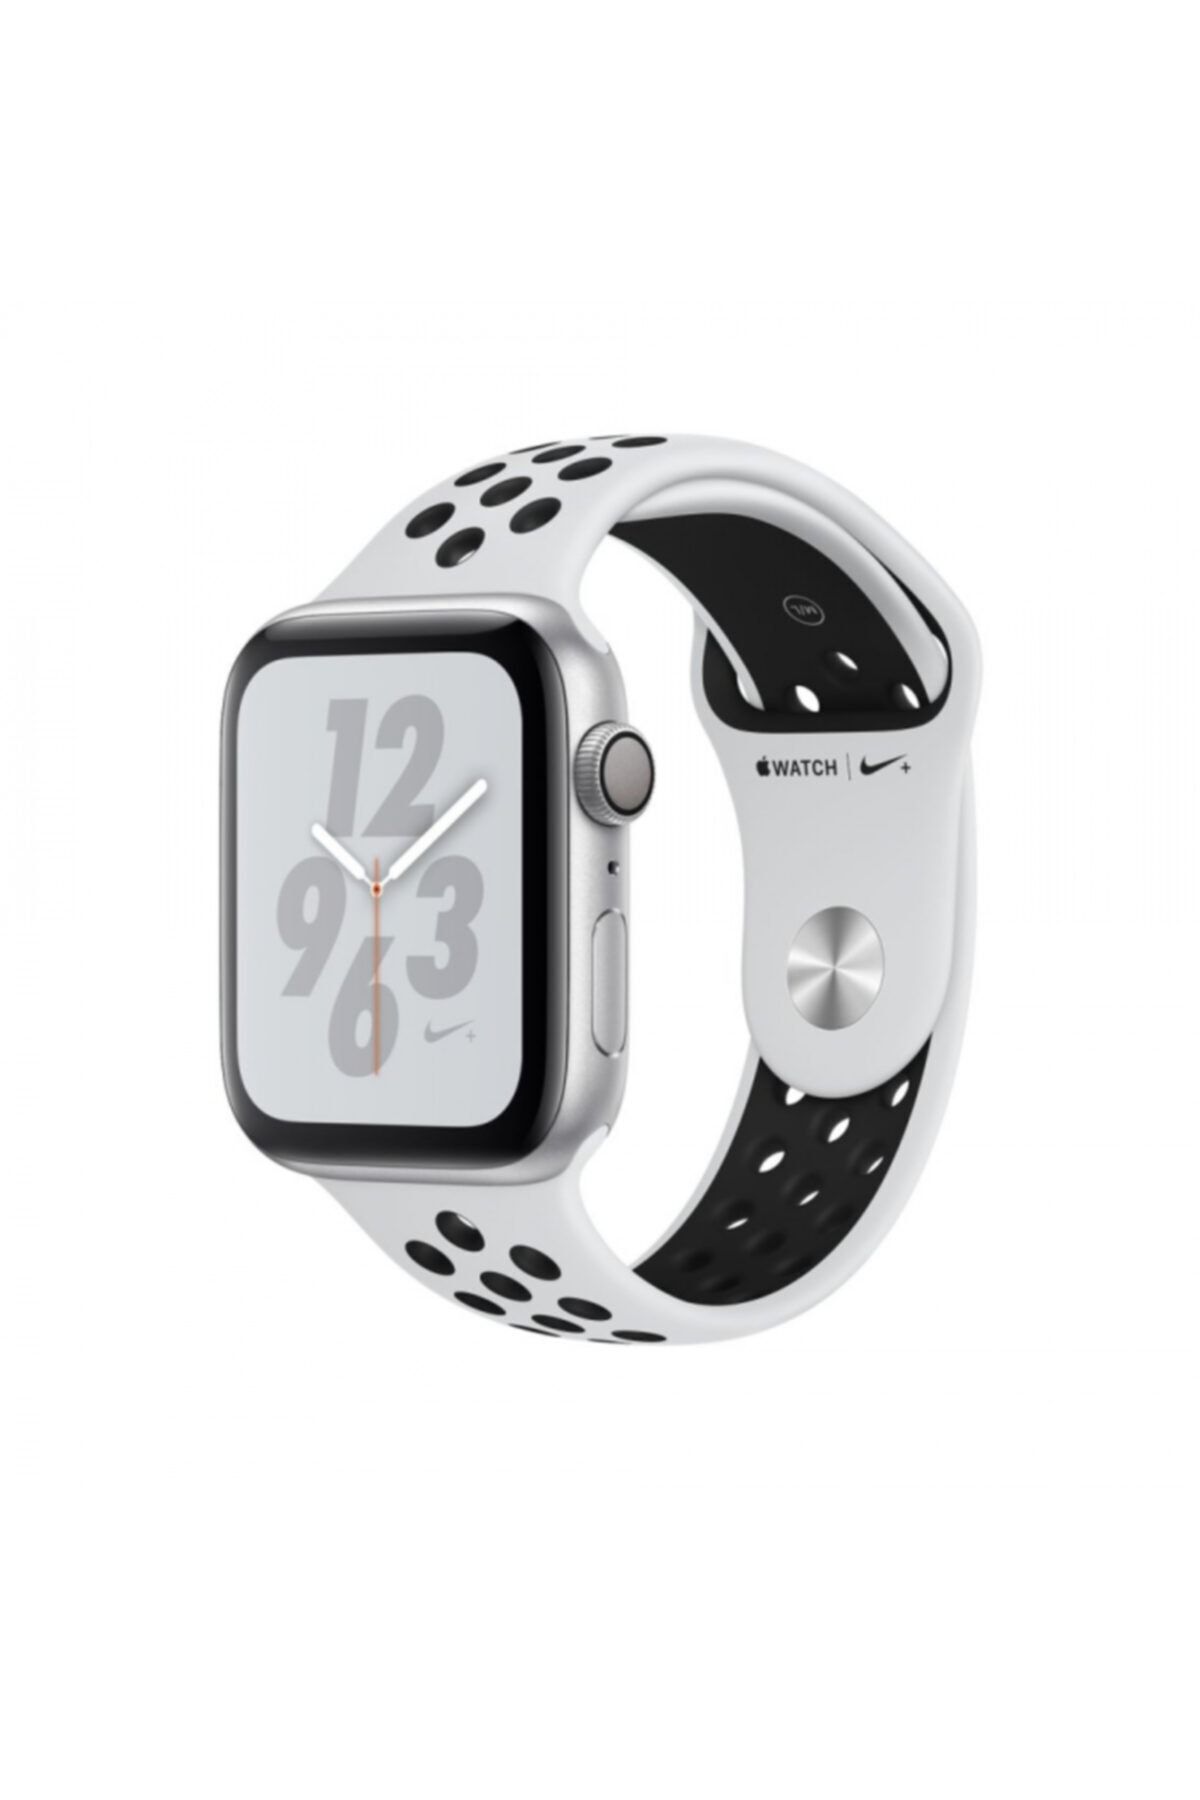 Apple Watch Nike+ Series 4 Gps, 40mm Silver Aluminium Case With Pure Platinum/black Nike Sport Band